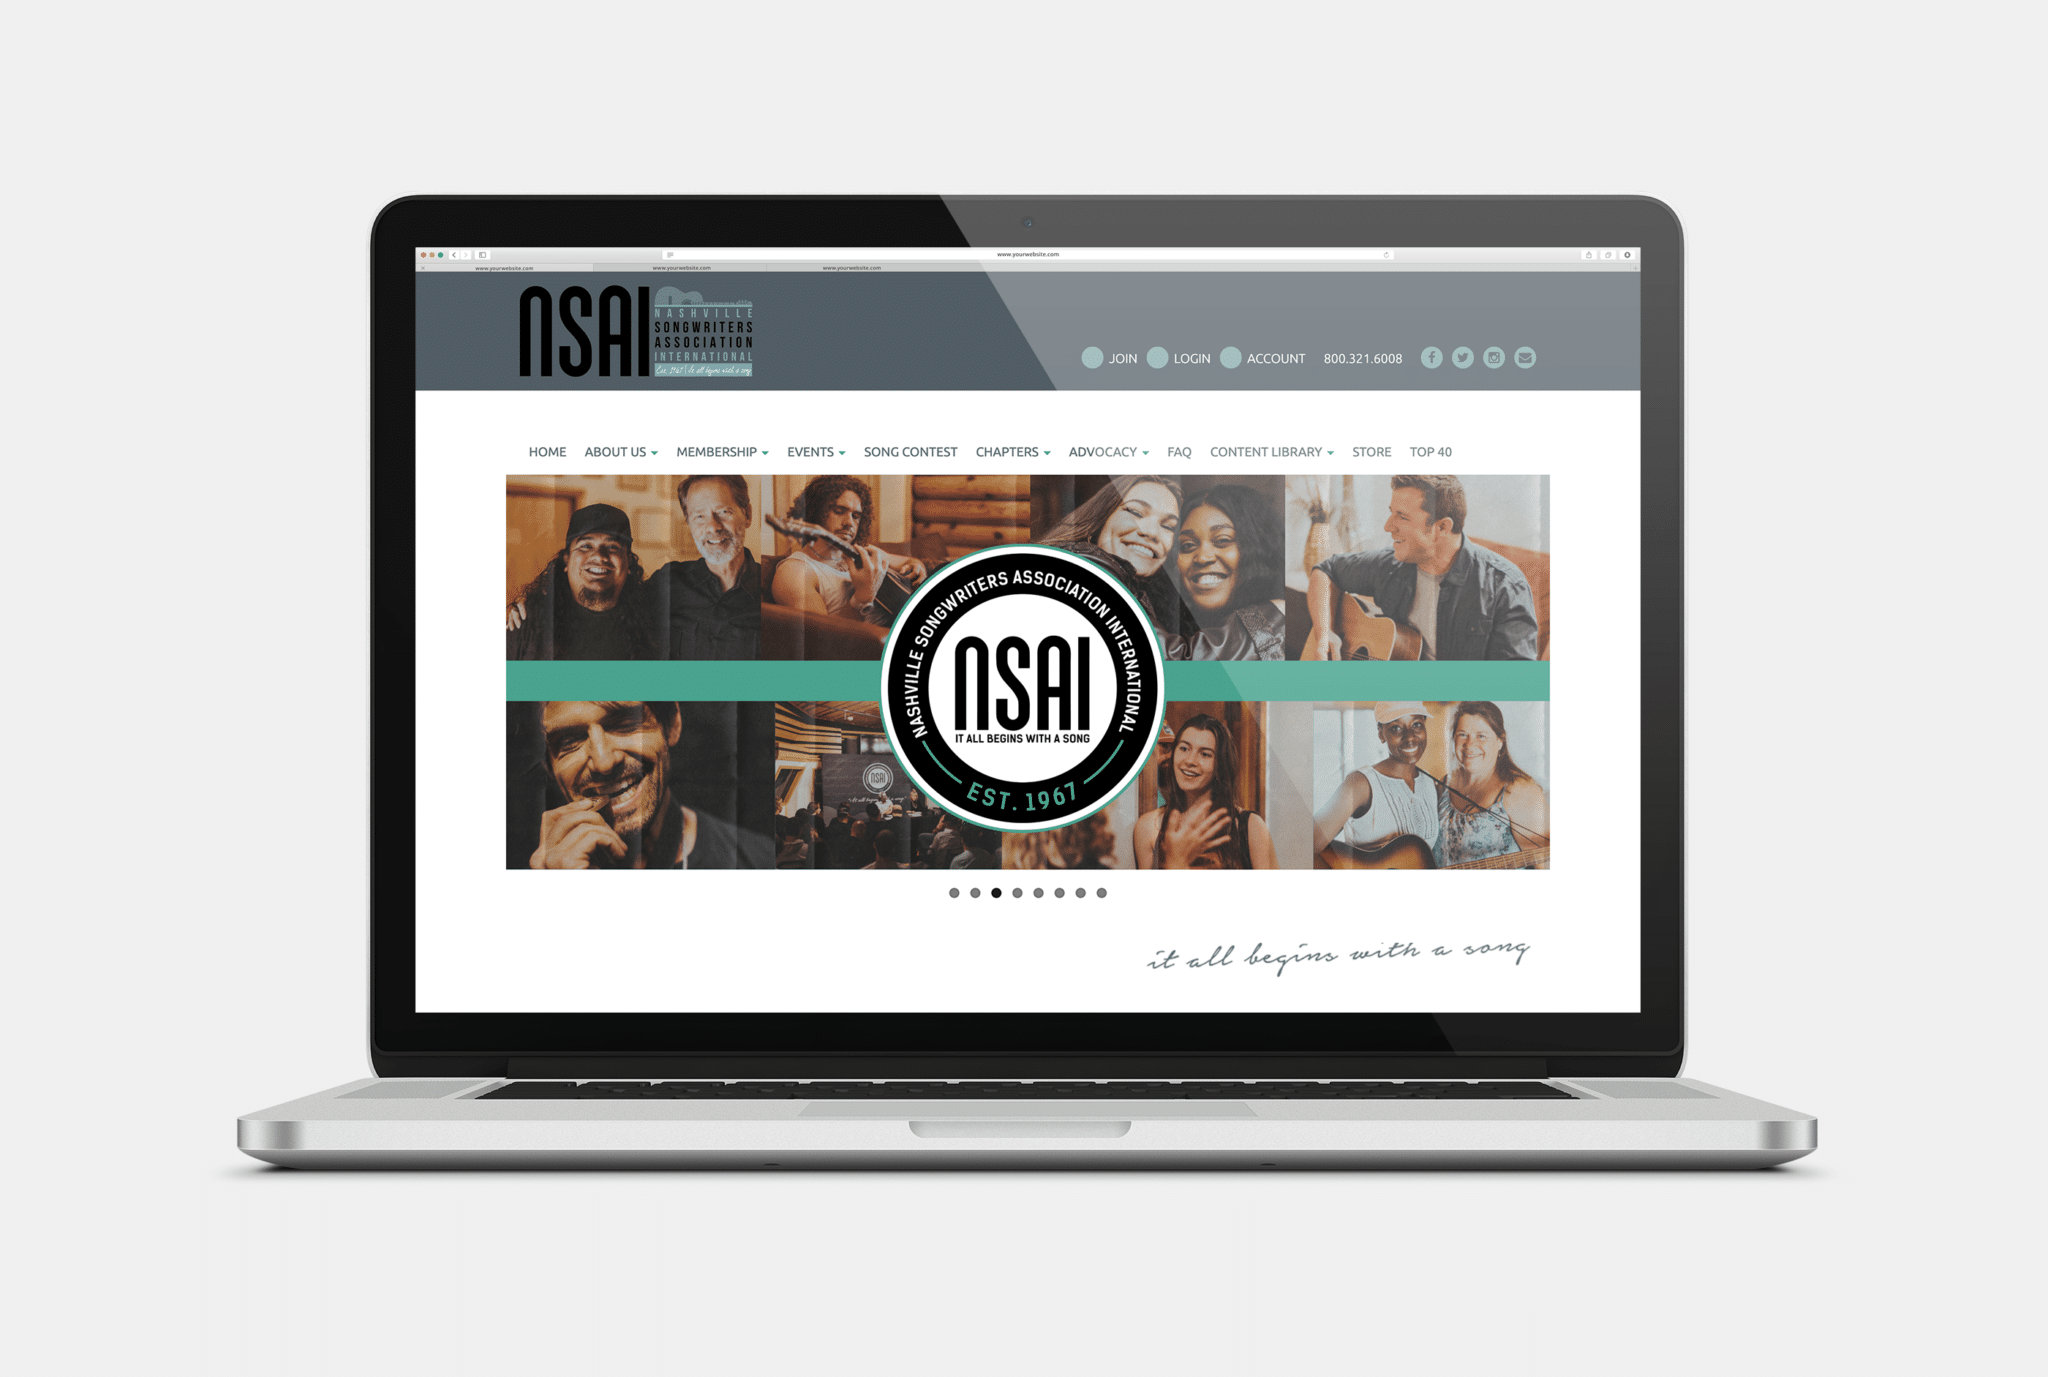 NSAI logo with images of people on an open laptop screen.